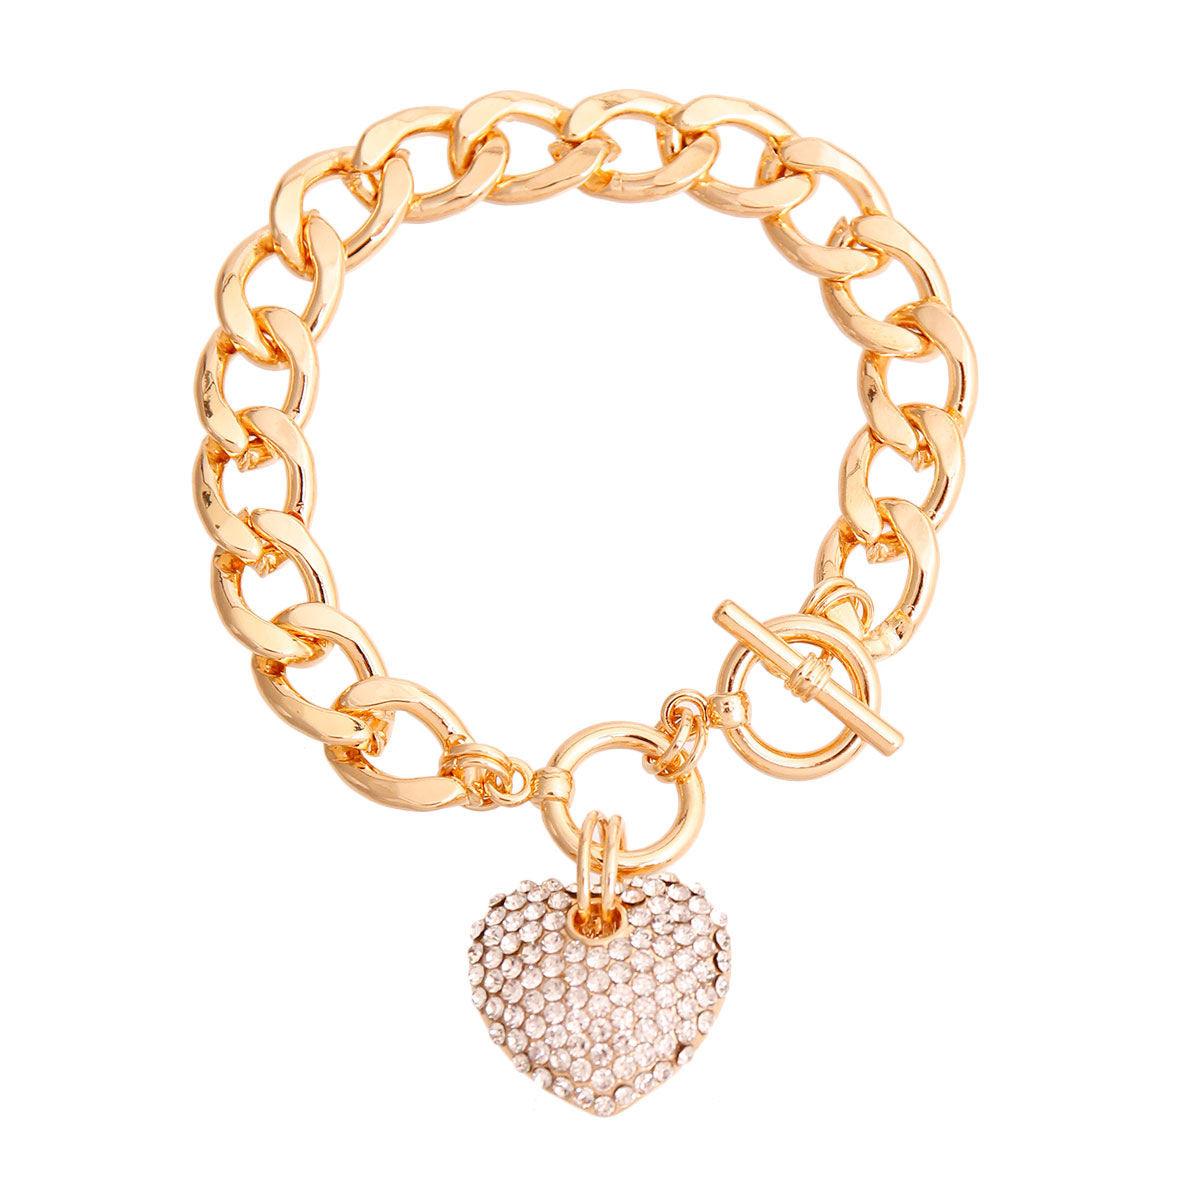 Gold Plated Link Chain Bracelet Clear Heart Charm